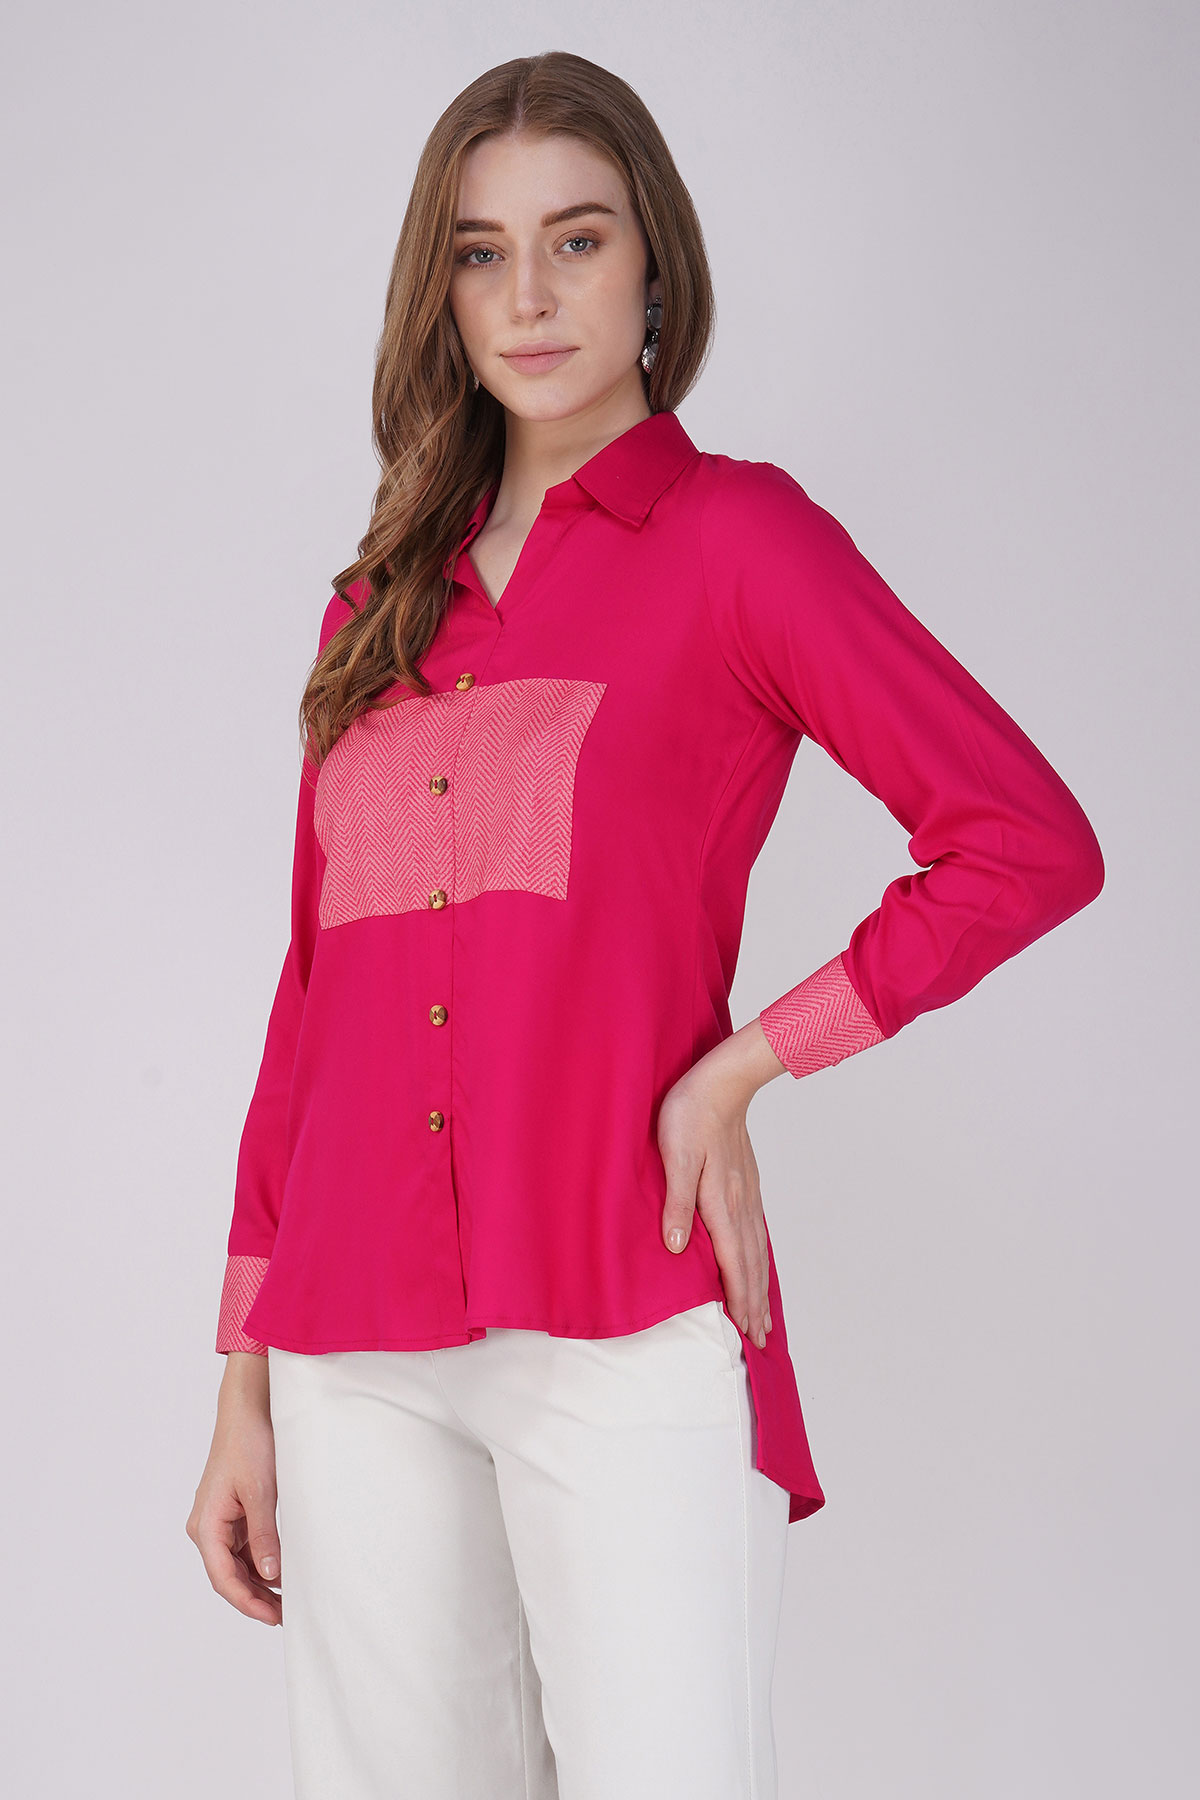 Hot Pink Shirt with Front Striped Muslin Patch